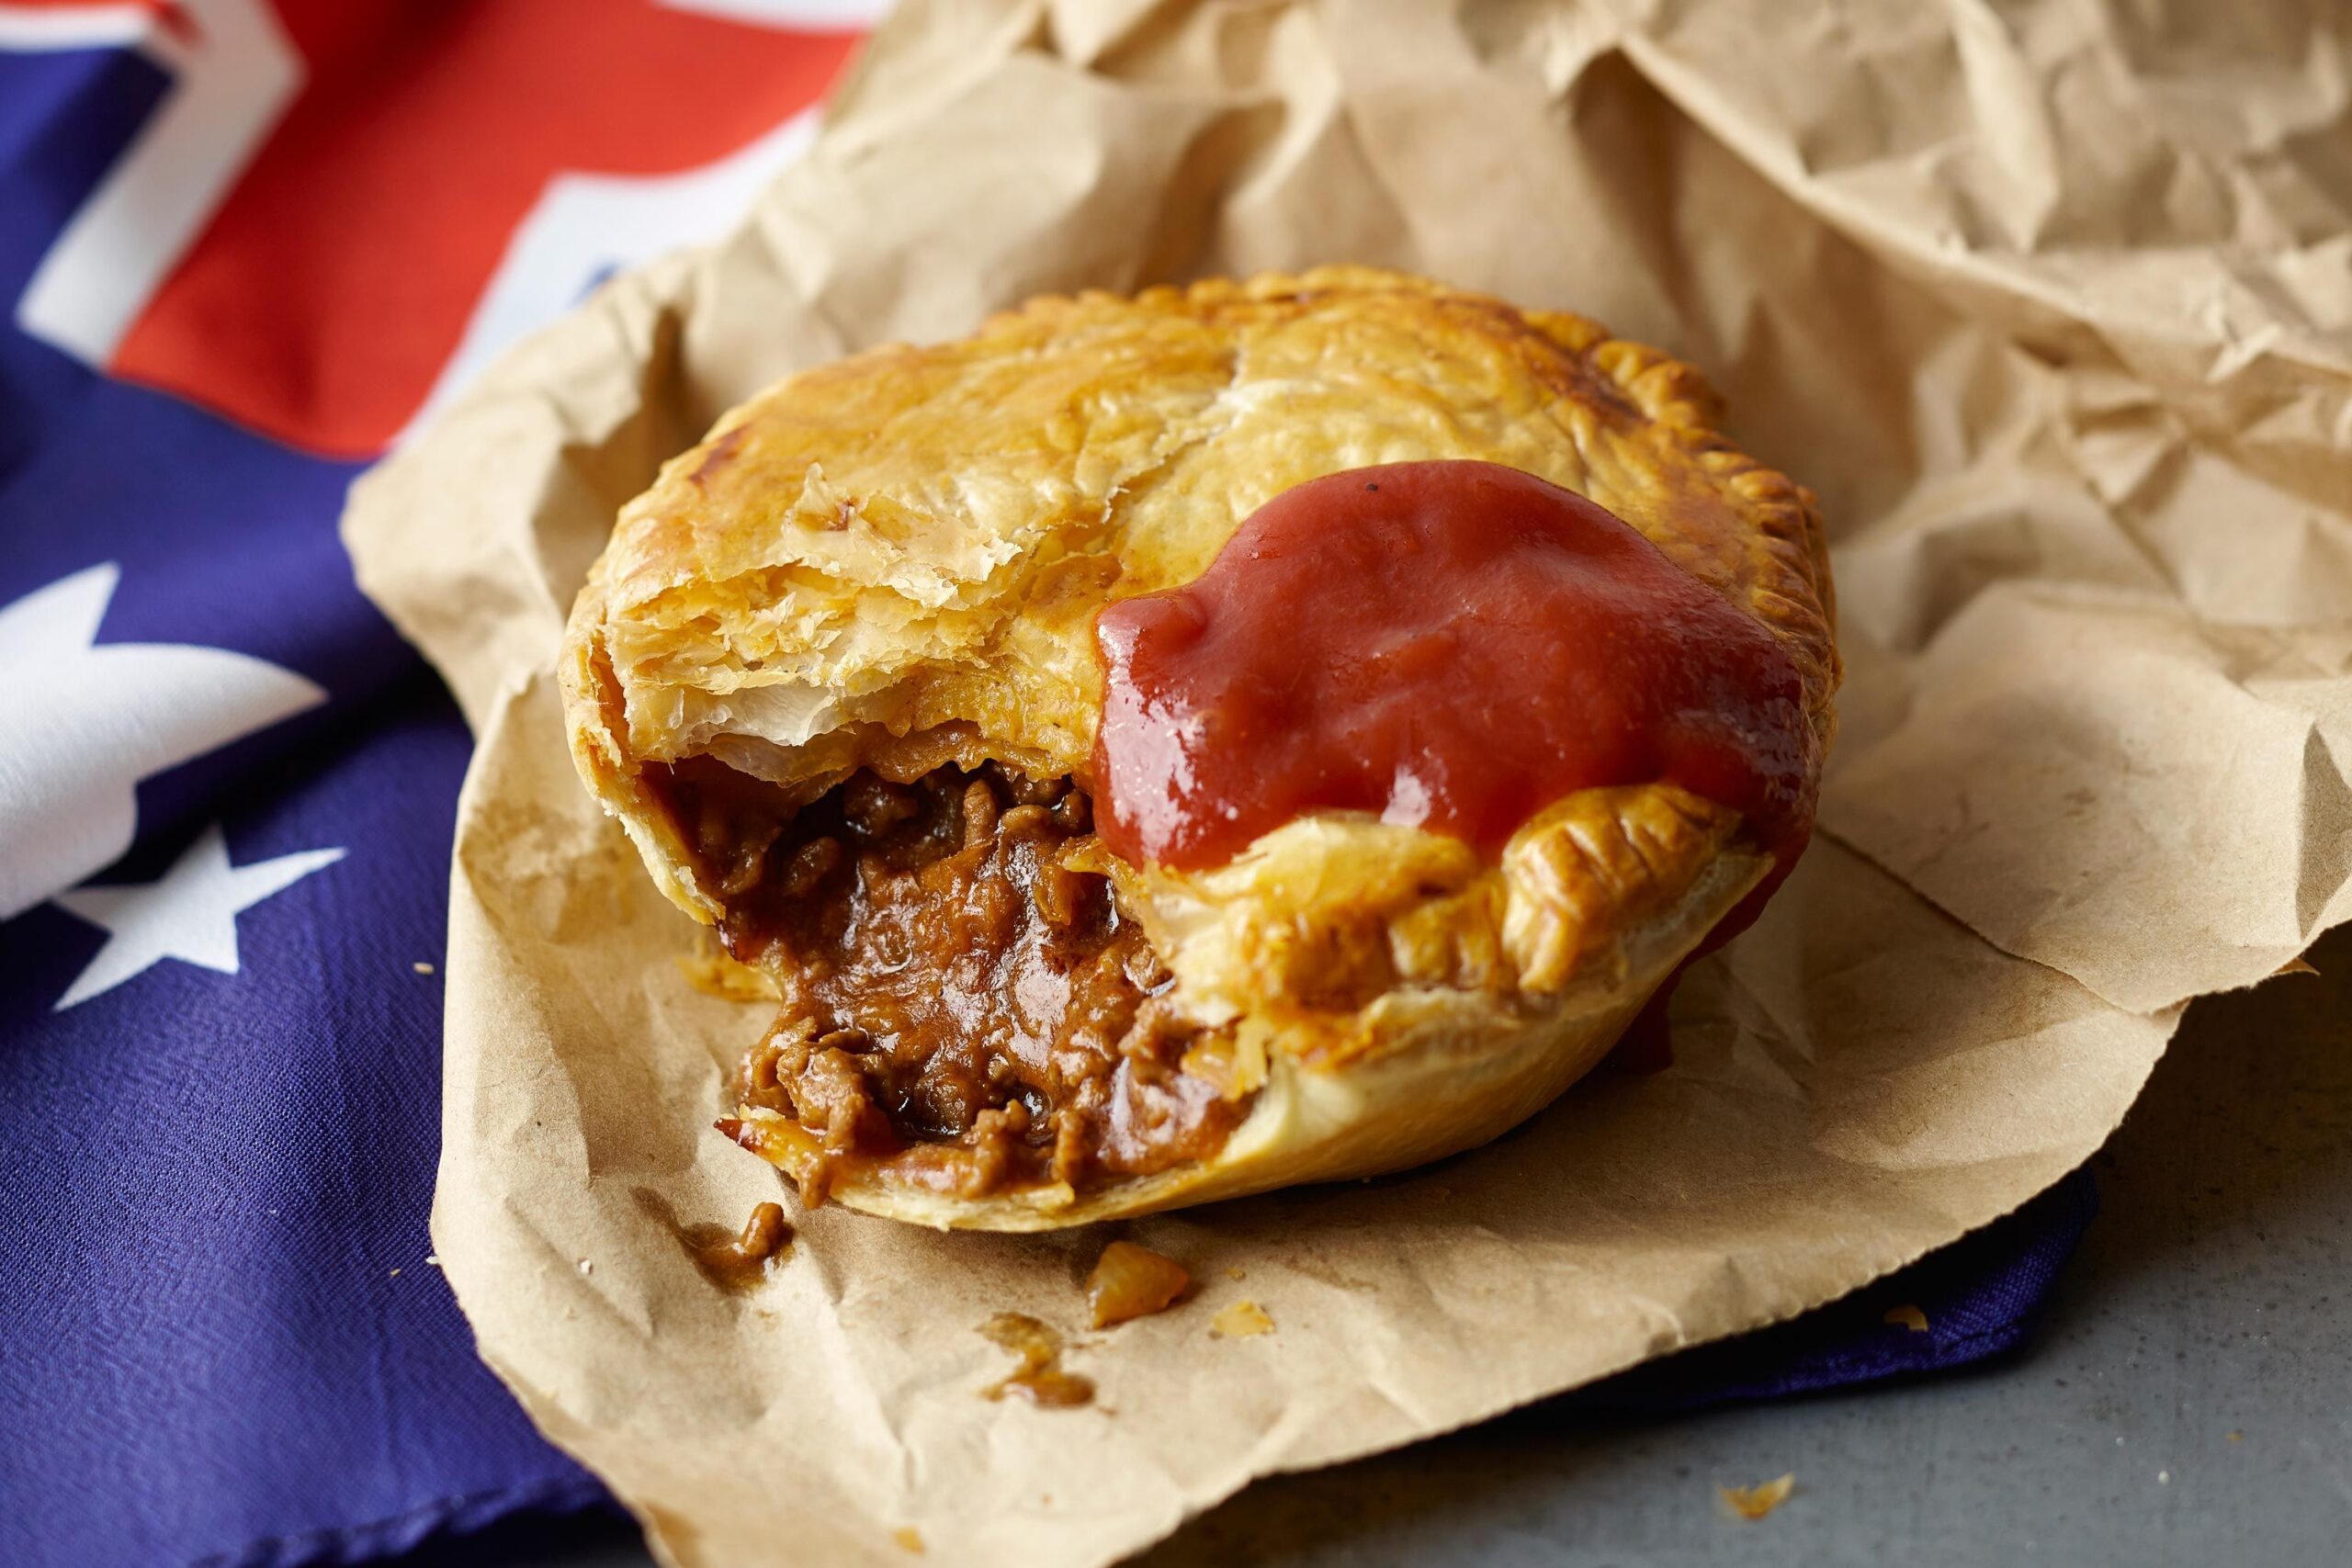 Seasoning is crucial in meat pies as it brings out the flavors of the filling. Salt and pepper are essential, but depending on the type of meat pie, additional spices such as nutmeg, cumin, or paprika might be used to achieve the desired flavor profile.